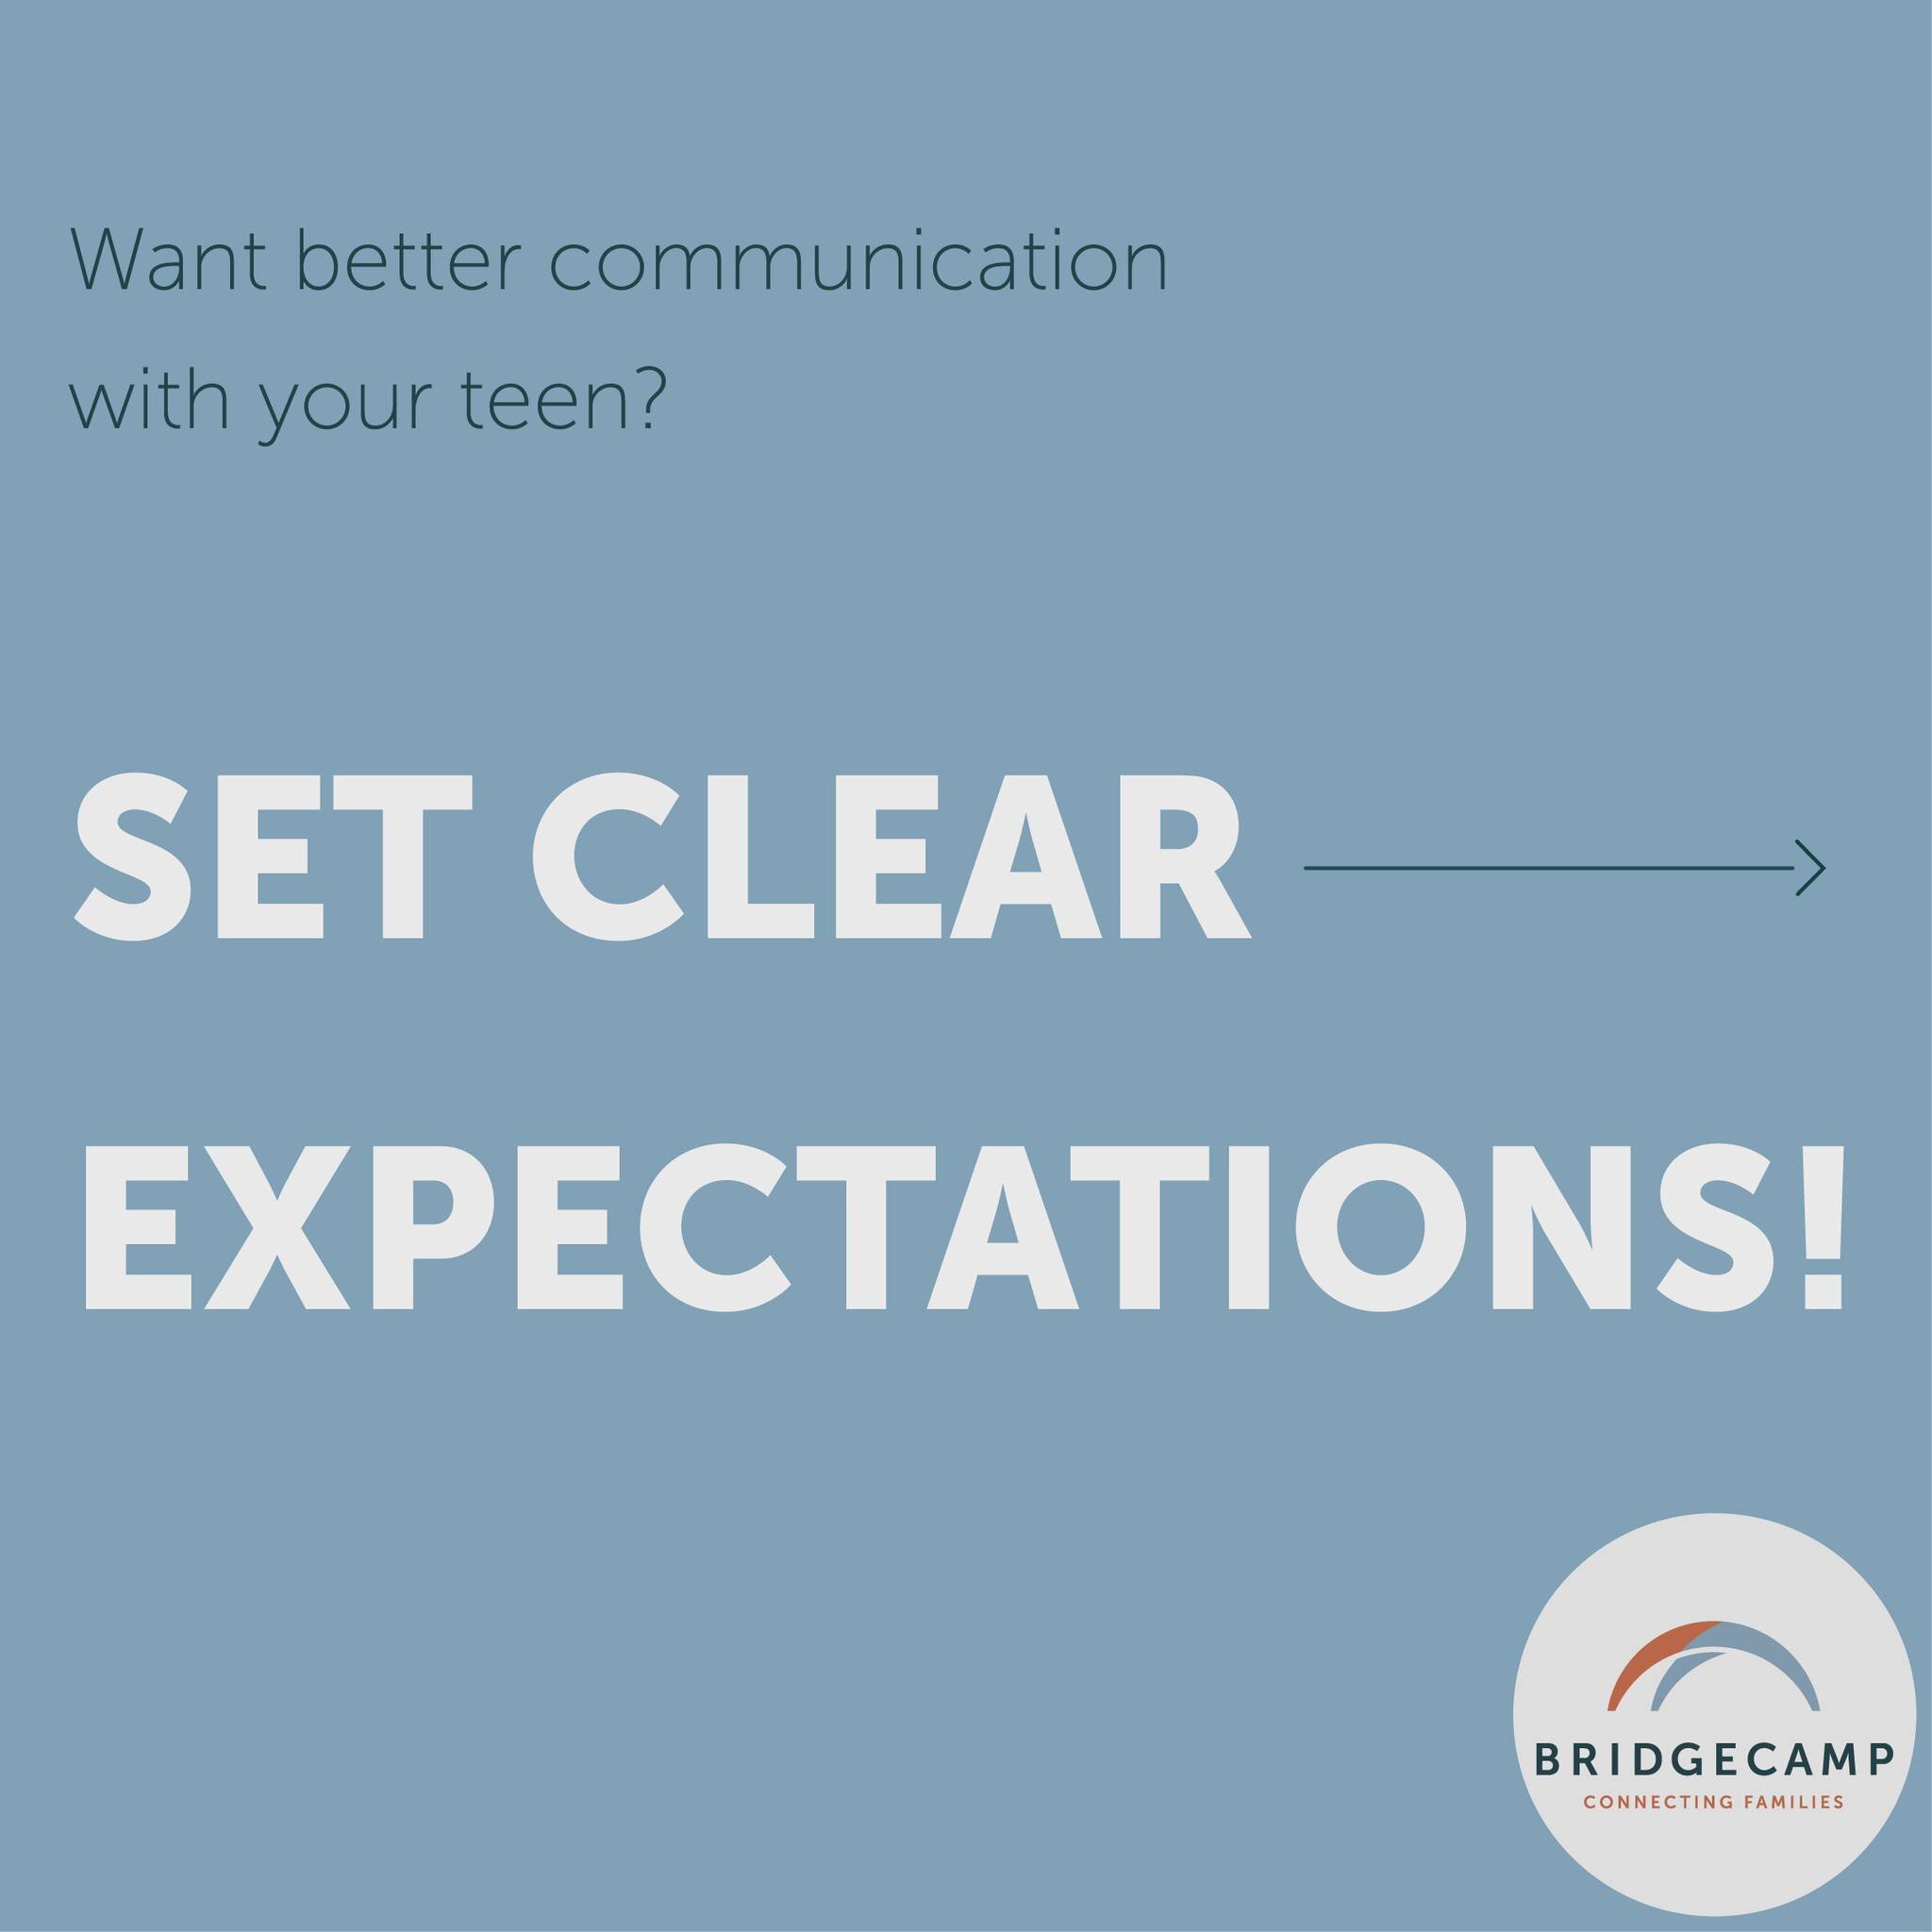 As parents, we all want to communicate more effectively with our teens. Here's a helpful tip that will help you with just that.

#communication #teensandparents #parentingteensandtweens #parentingteens #parentingtips #parenting101 #teenlife #momlife 